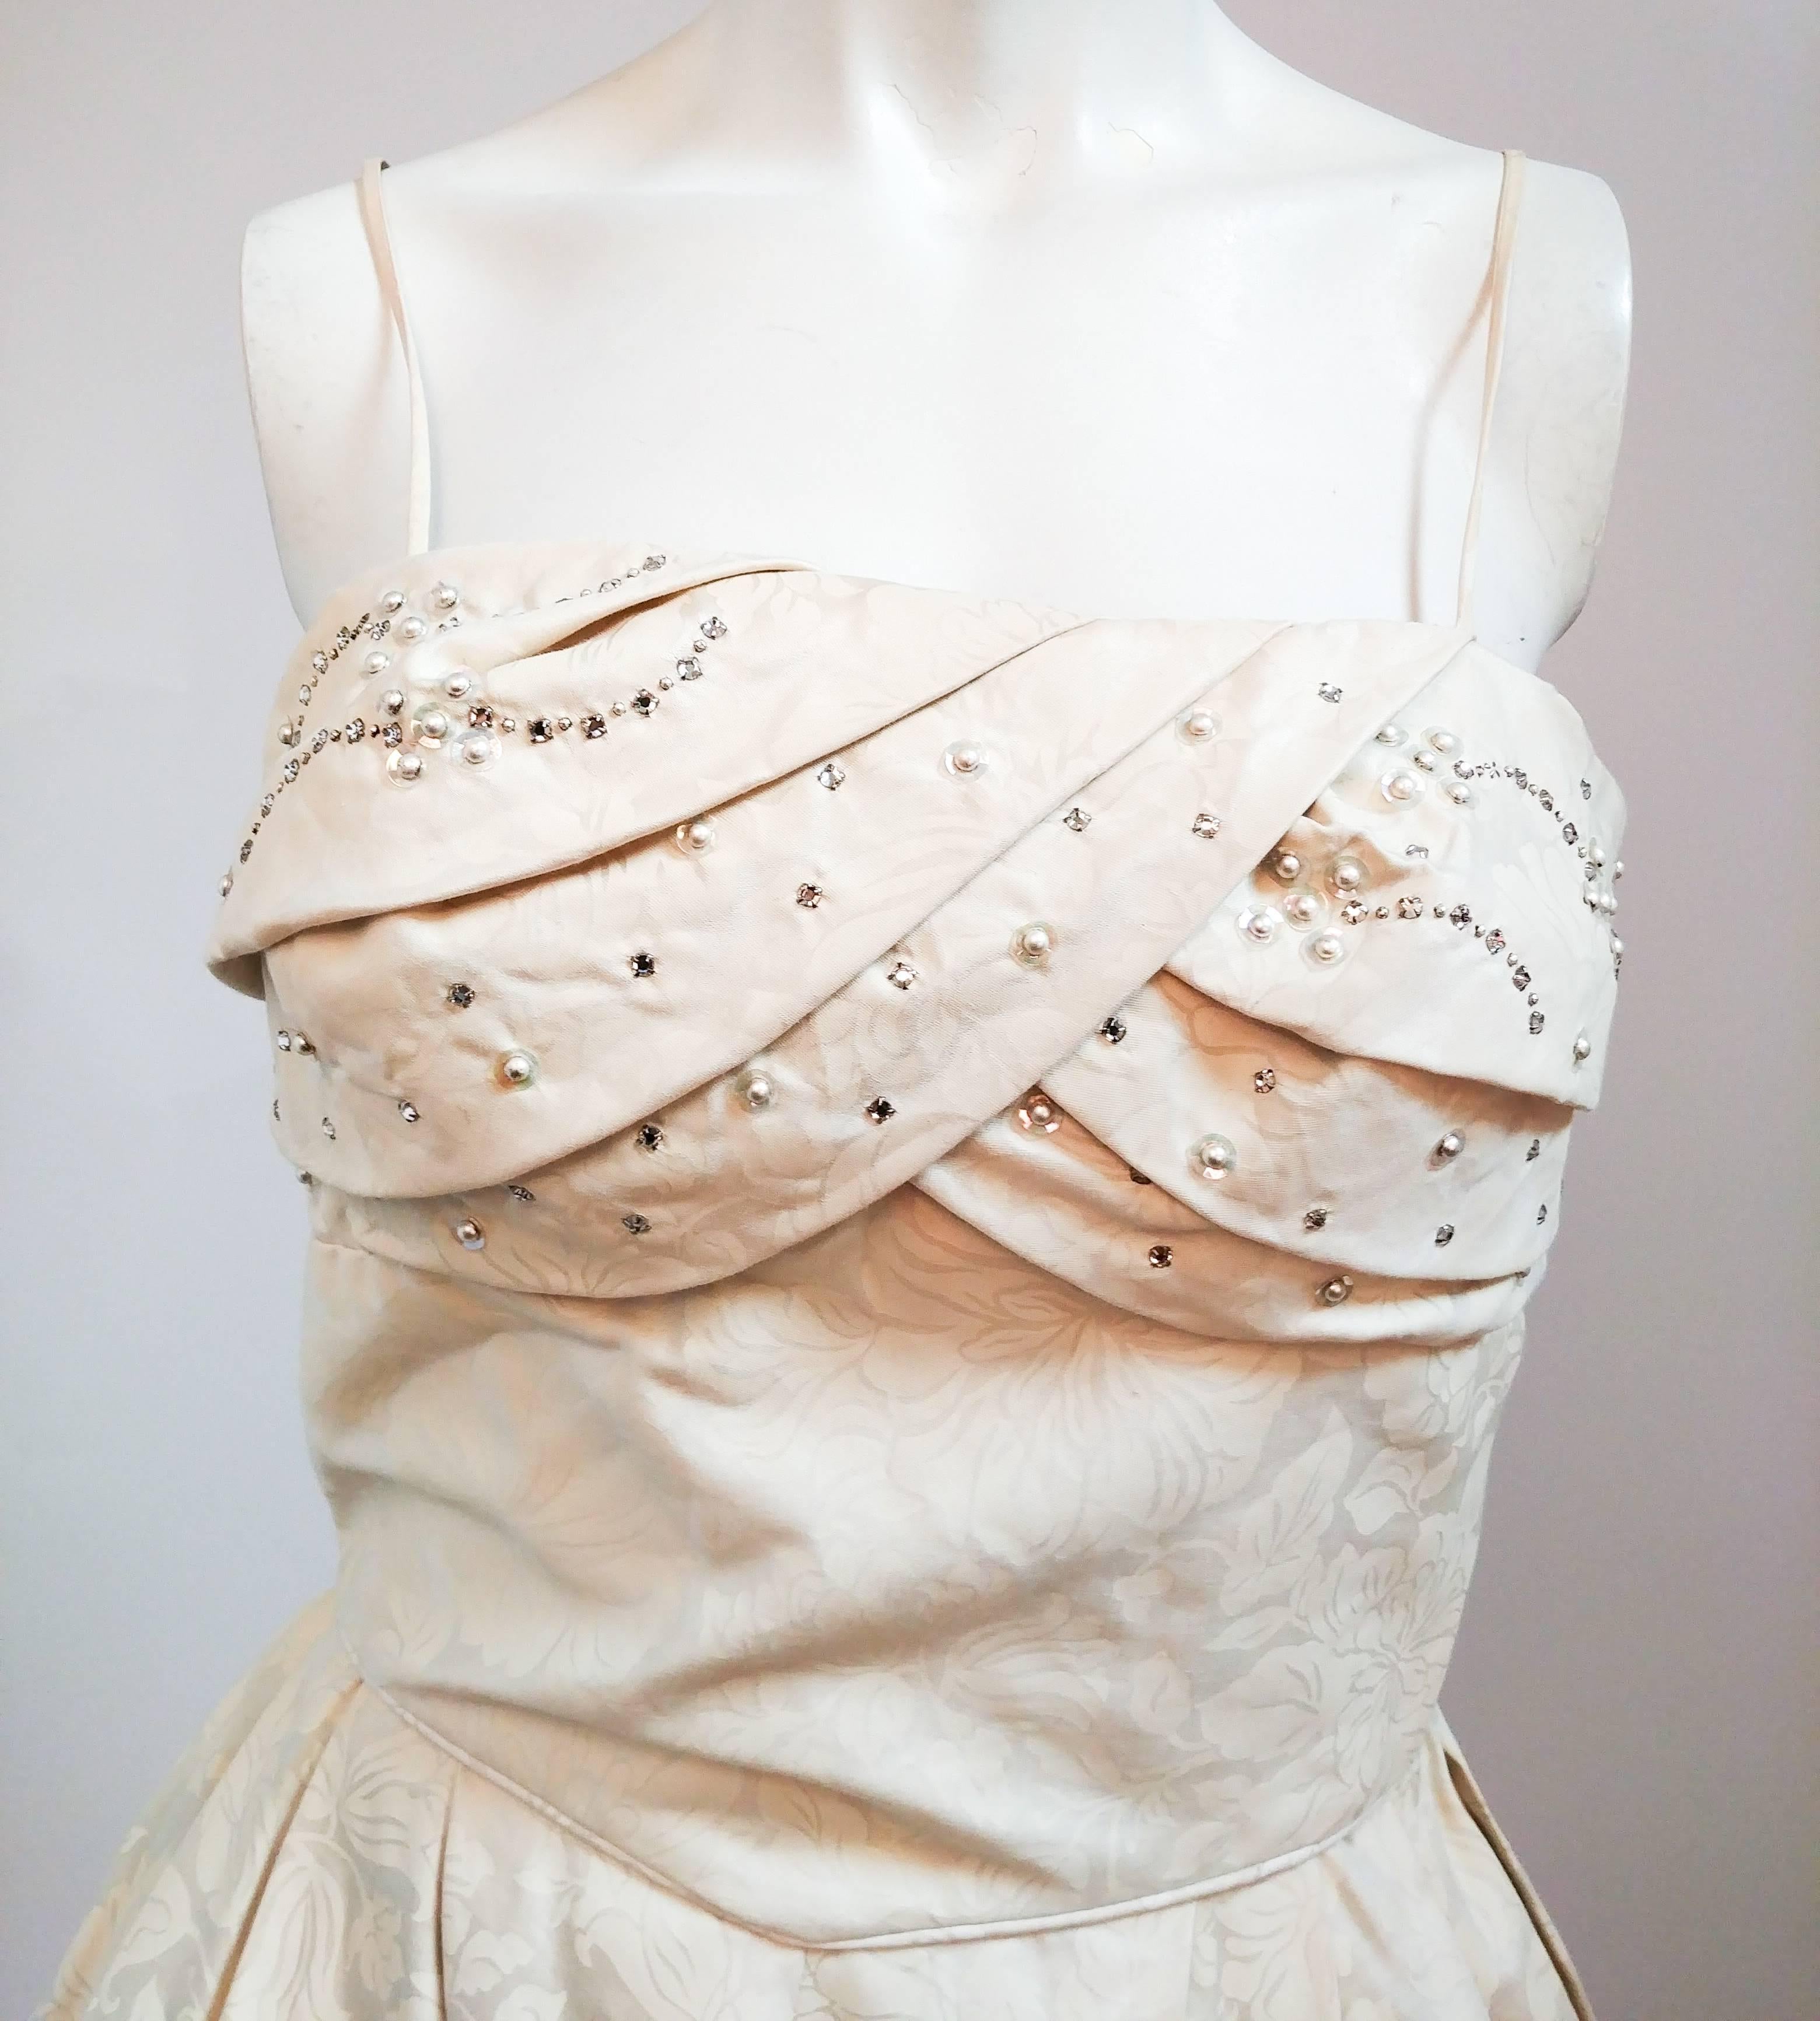 1950s Ivory Jacquard Dress w/ Beaded Bodice. Draped bust detail with rhinestones and pearls. Fitted waist, full circle skirt. Dress is photographed over petticoat in picture.